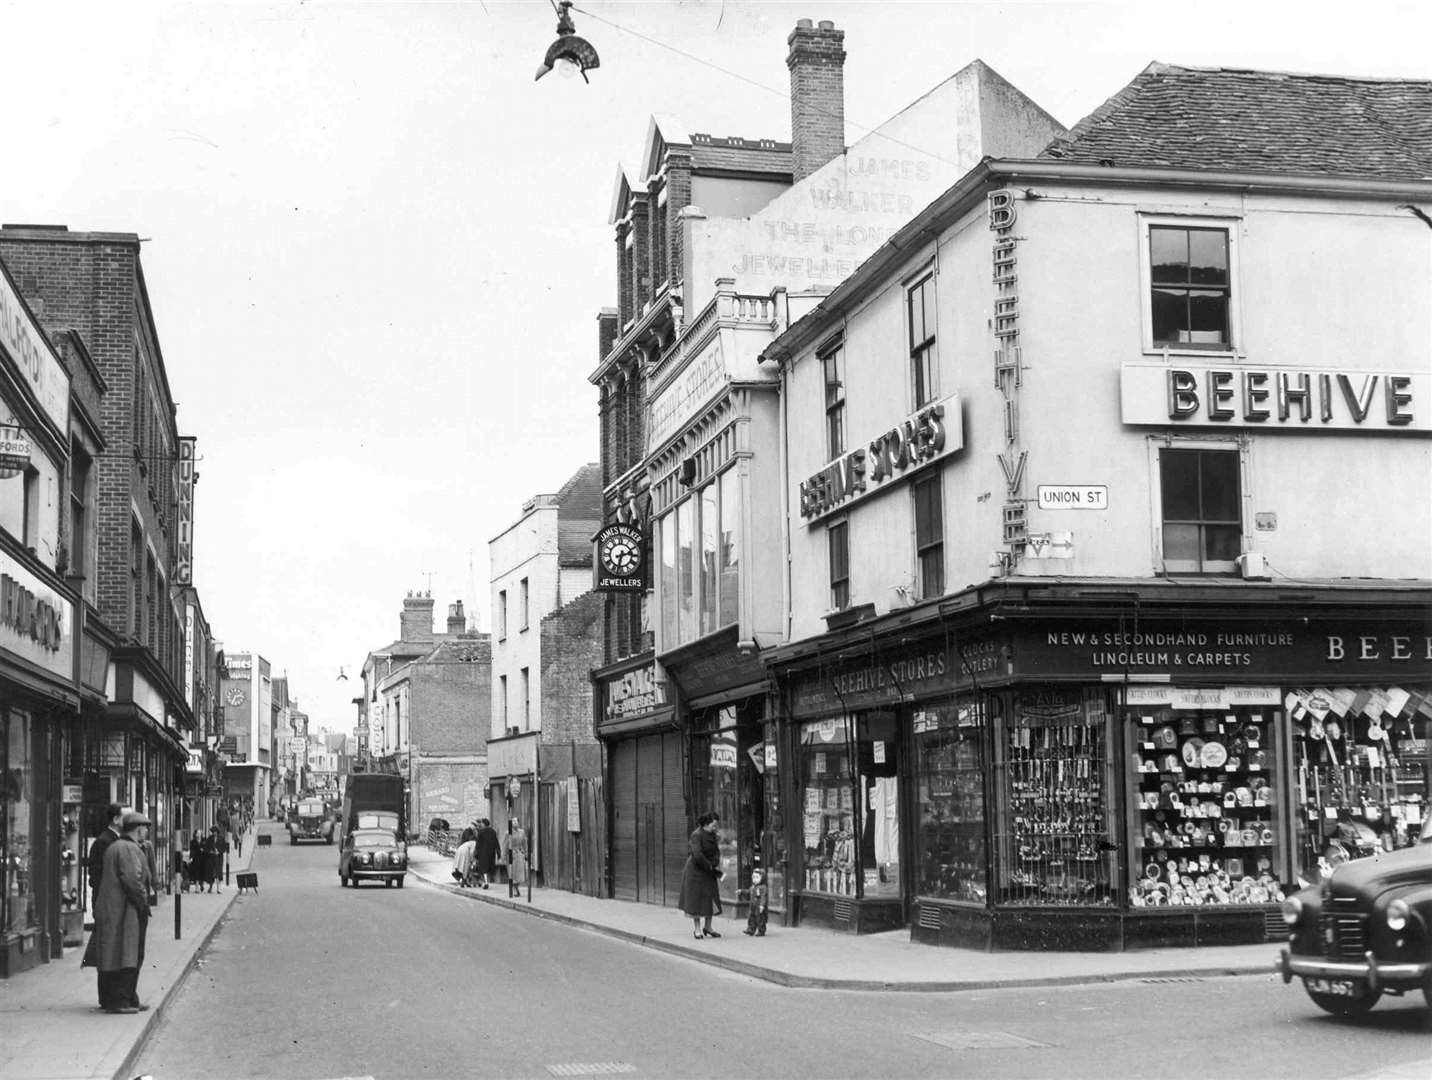 The Beehive, pictured at the junction of Week Street and Union Street in March 1958, was one of those marvellous shops that sold almost everything